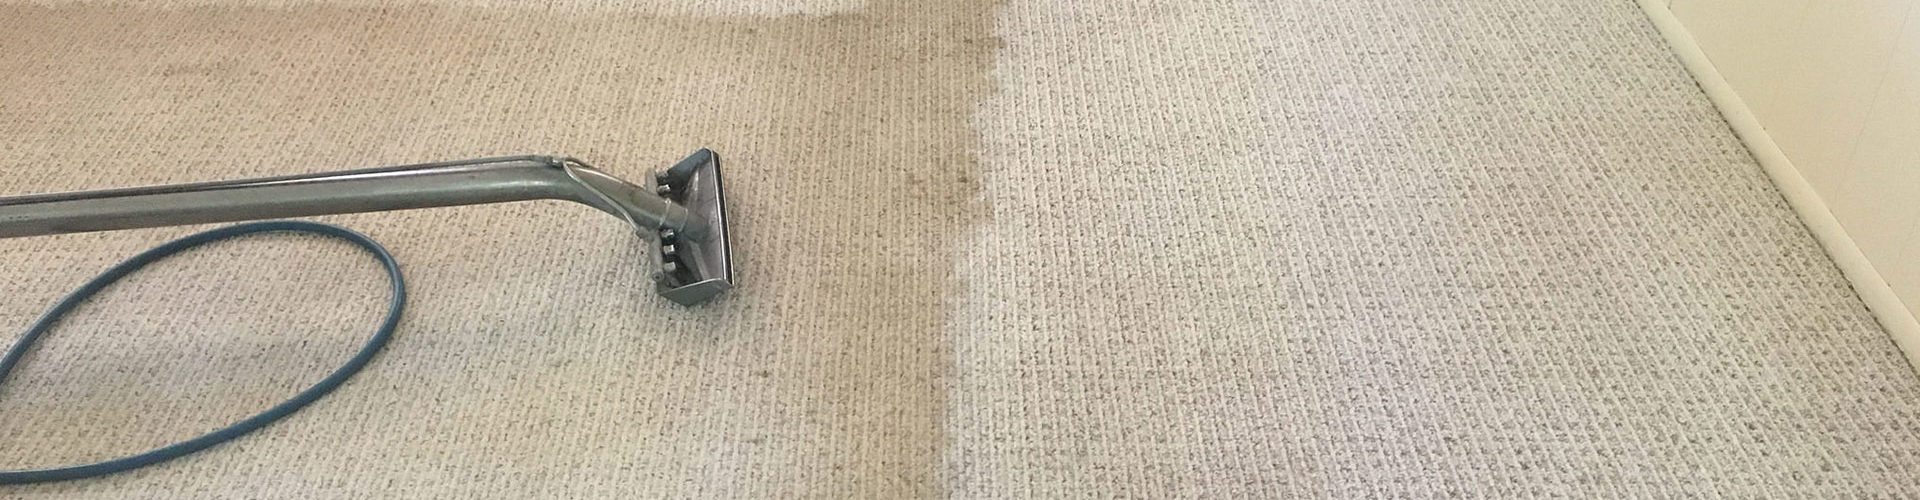 How long do you have to stay off carpet after steam cleaning?